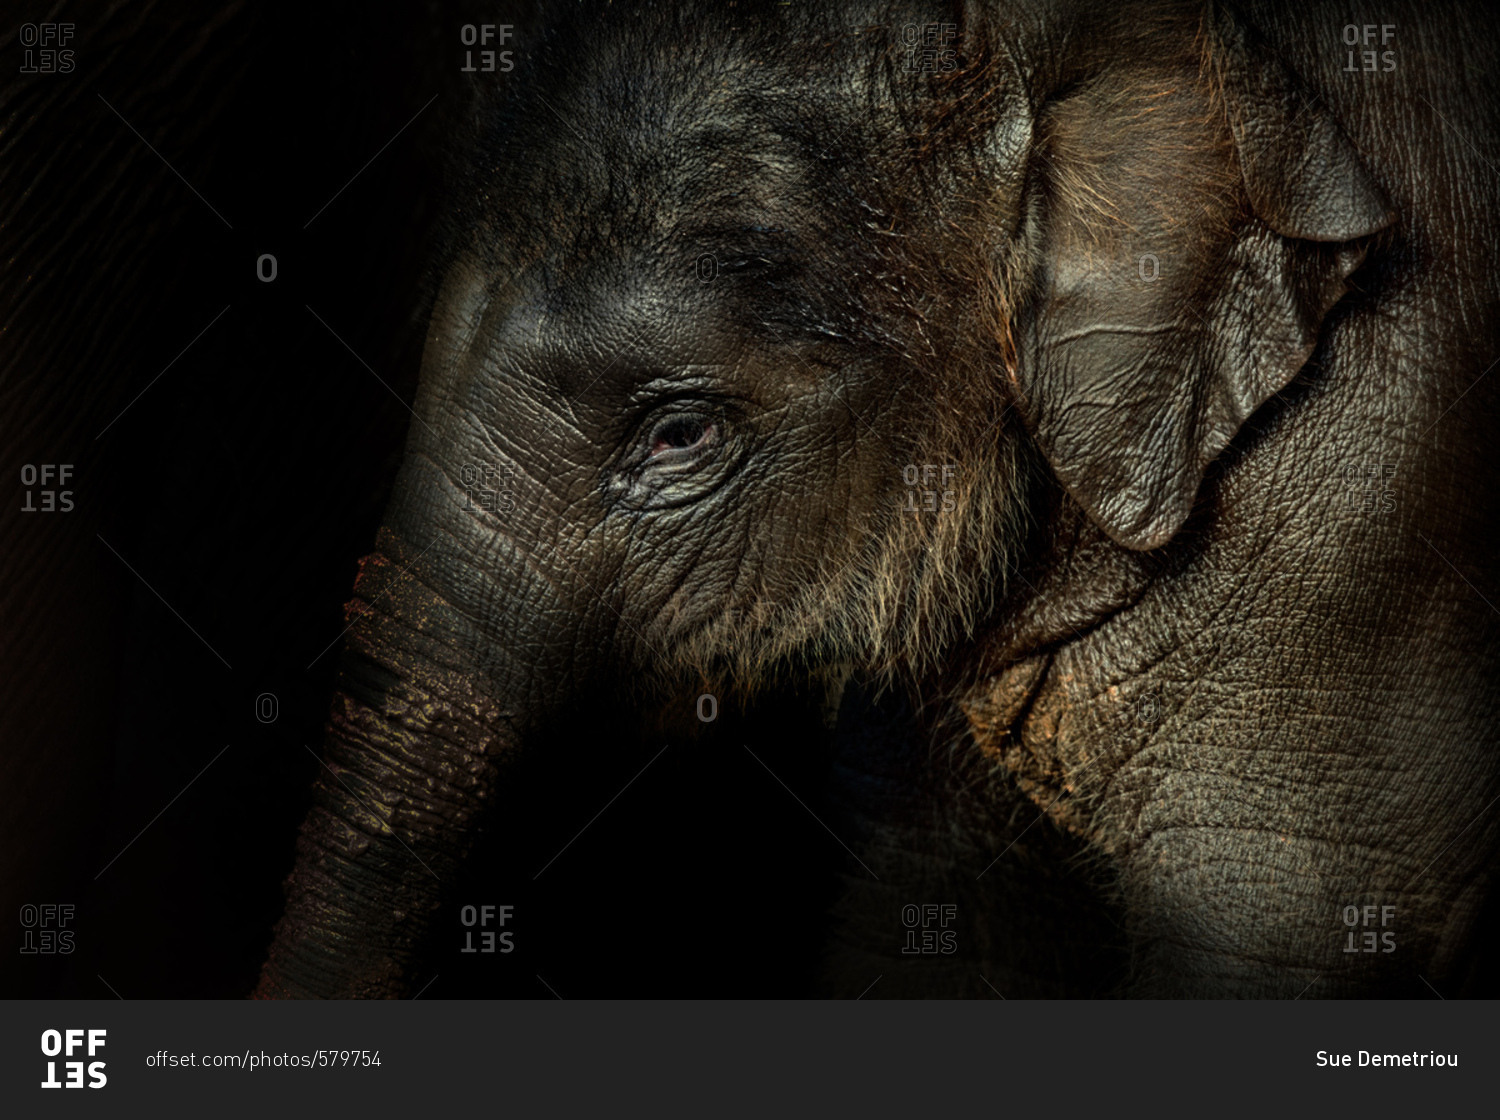 Portrait of a baby elephant